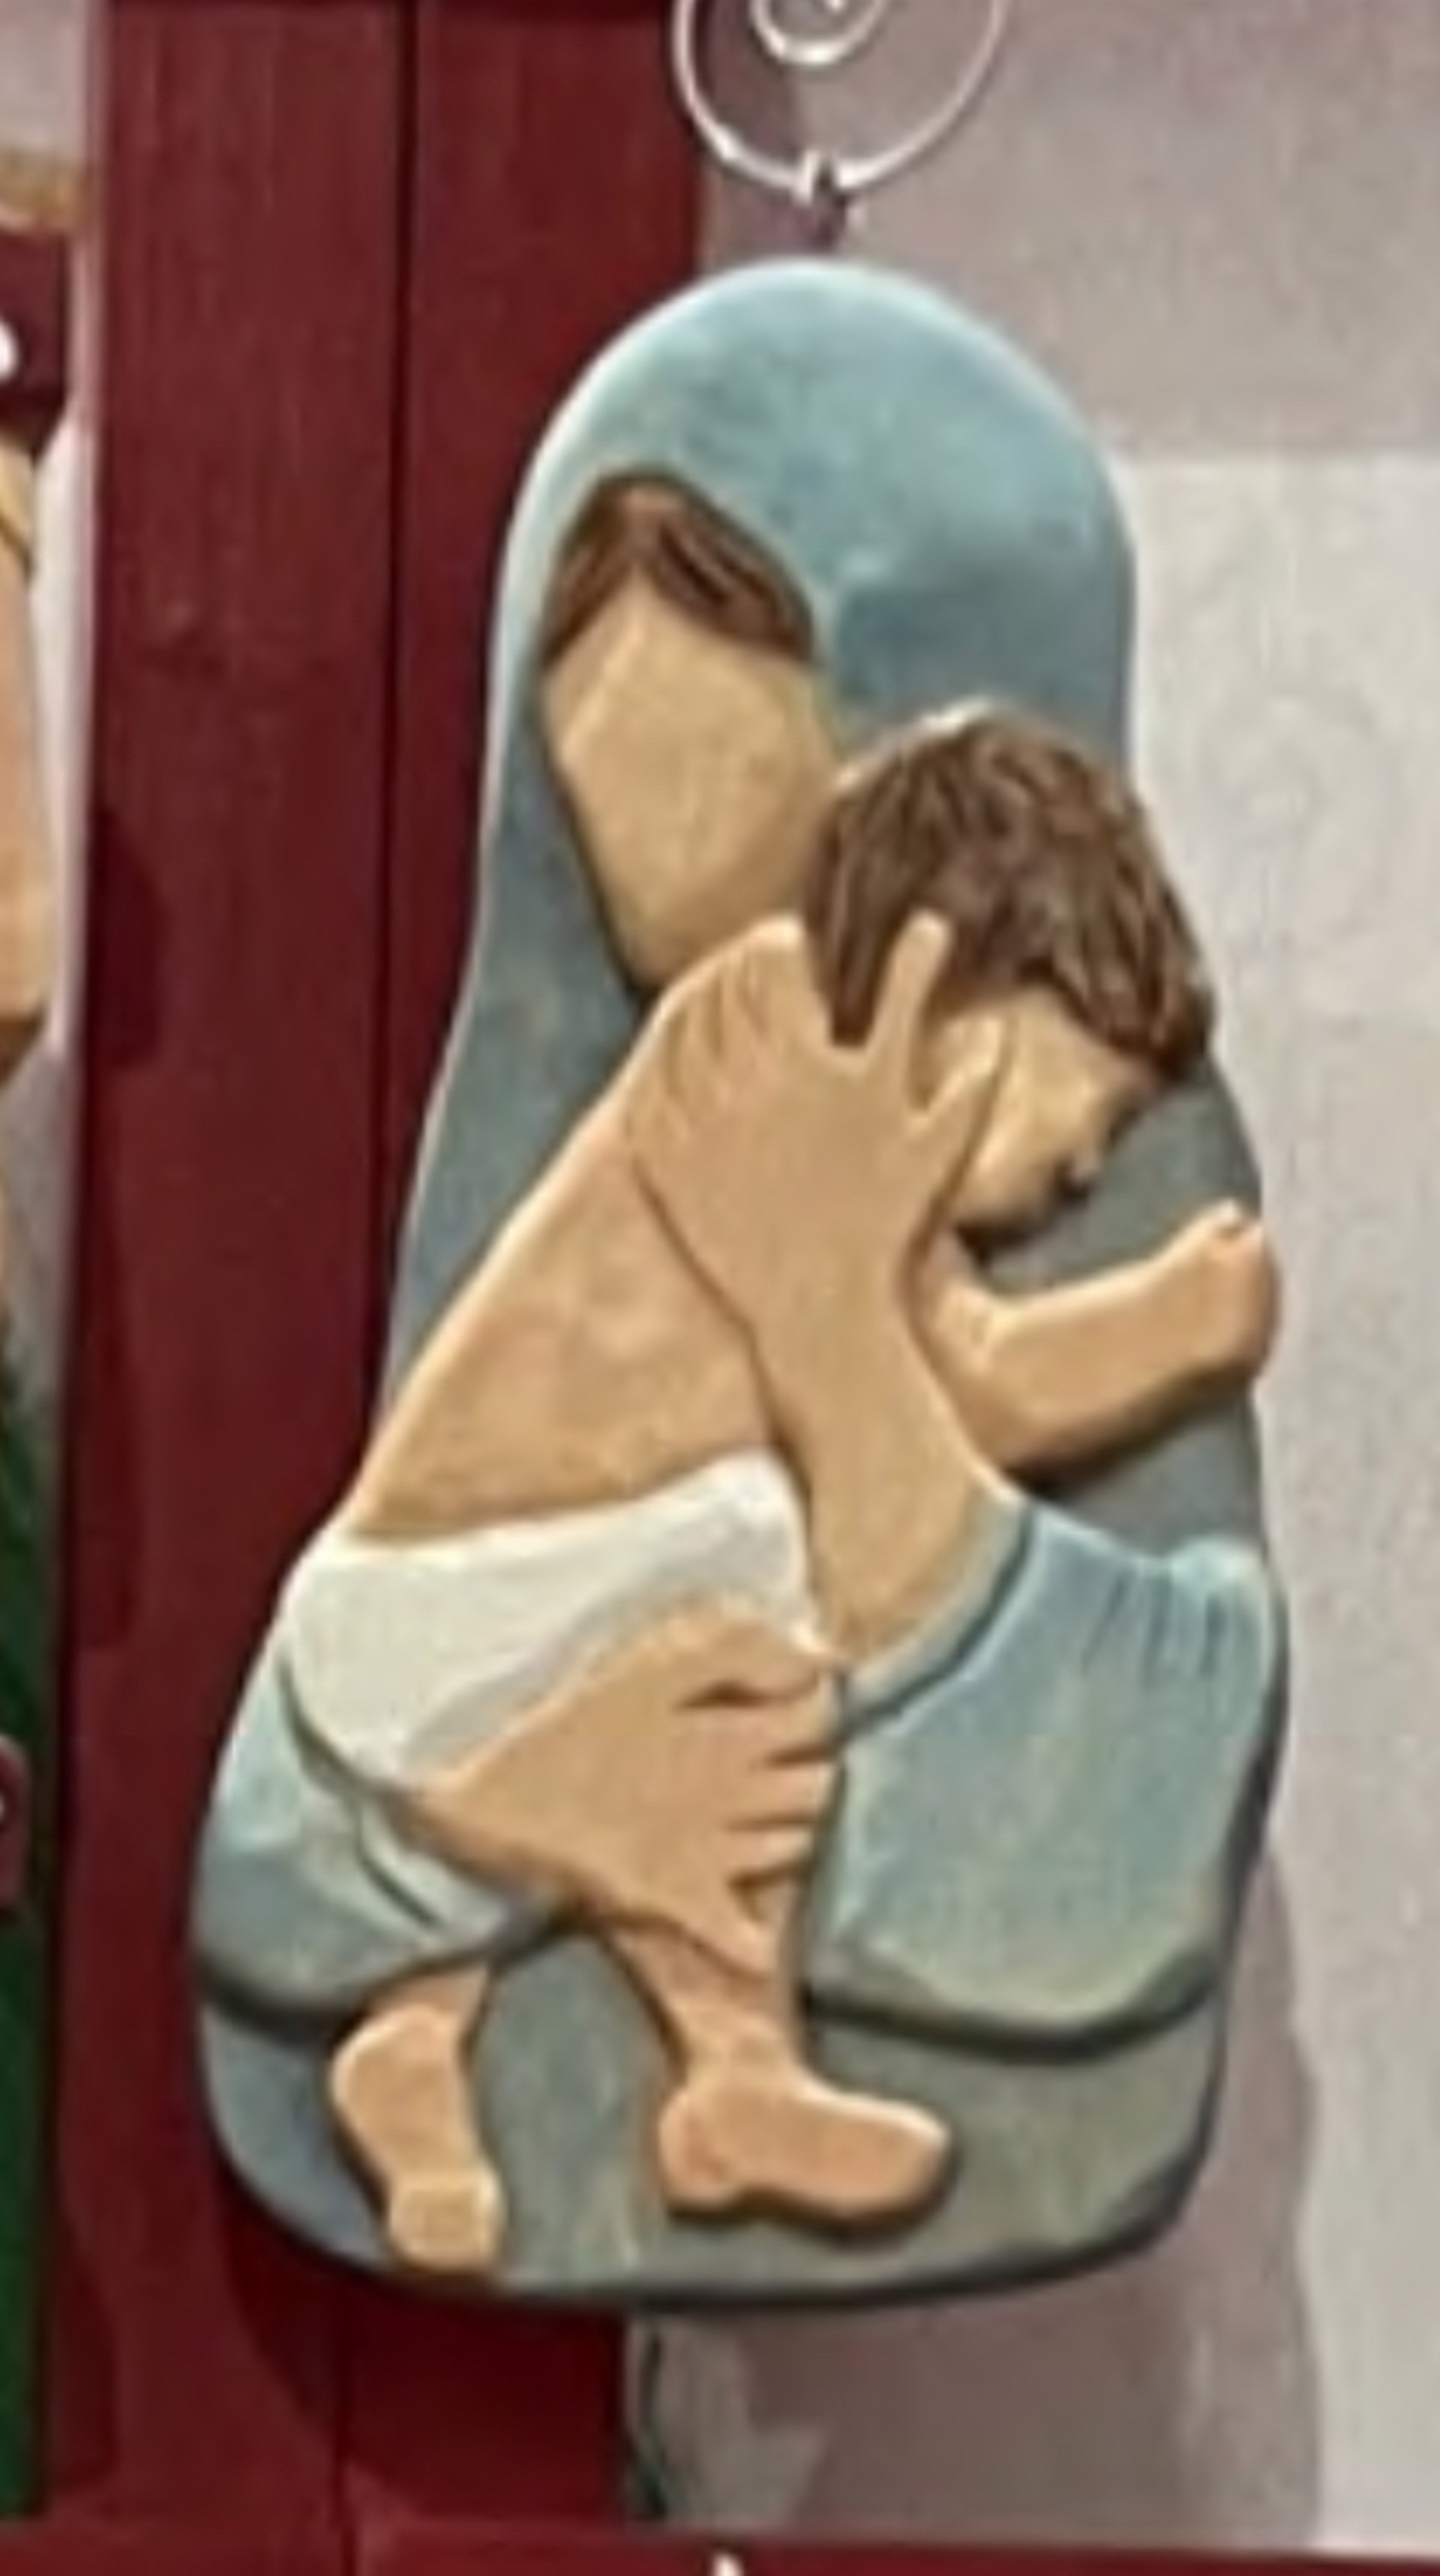 12 Madonna and Child 2 by Jeanne Mahan